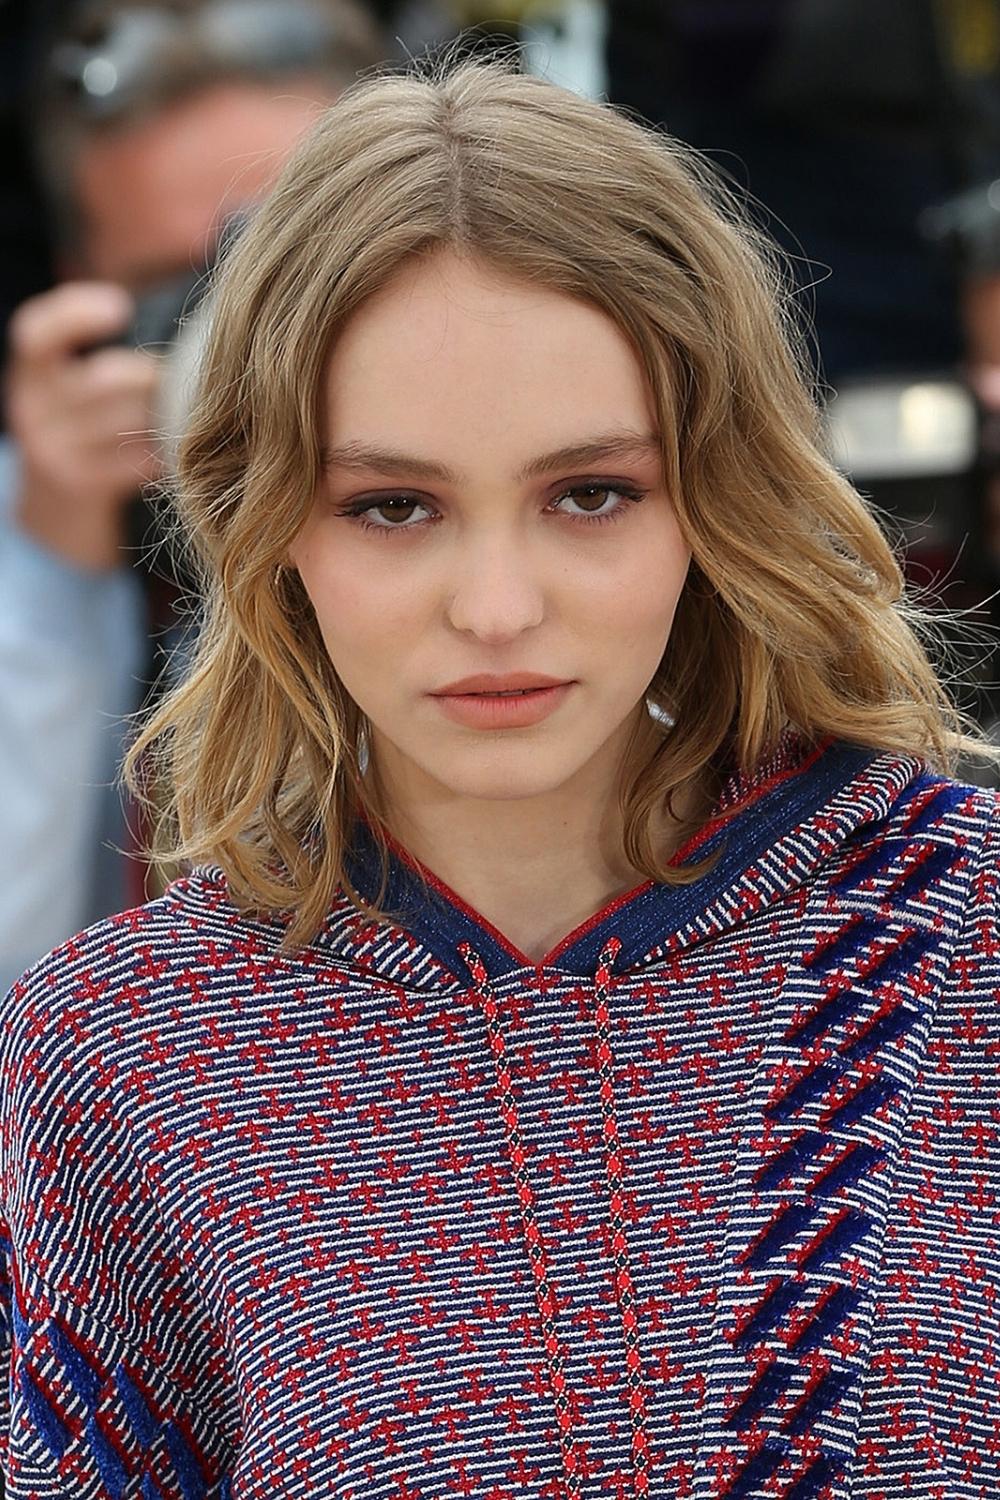 Lily-Rose Depp’s Body Measurements